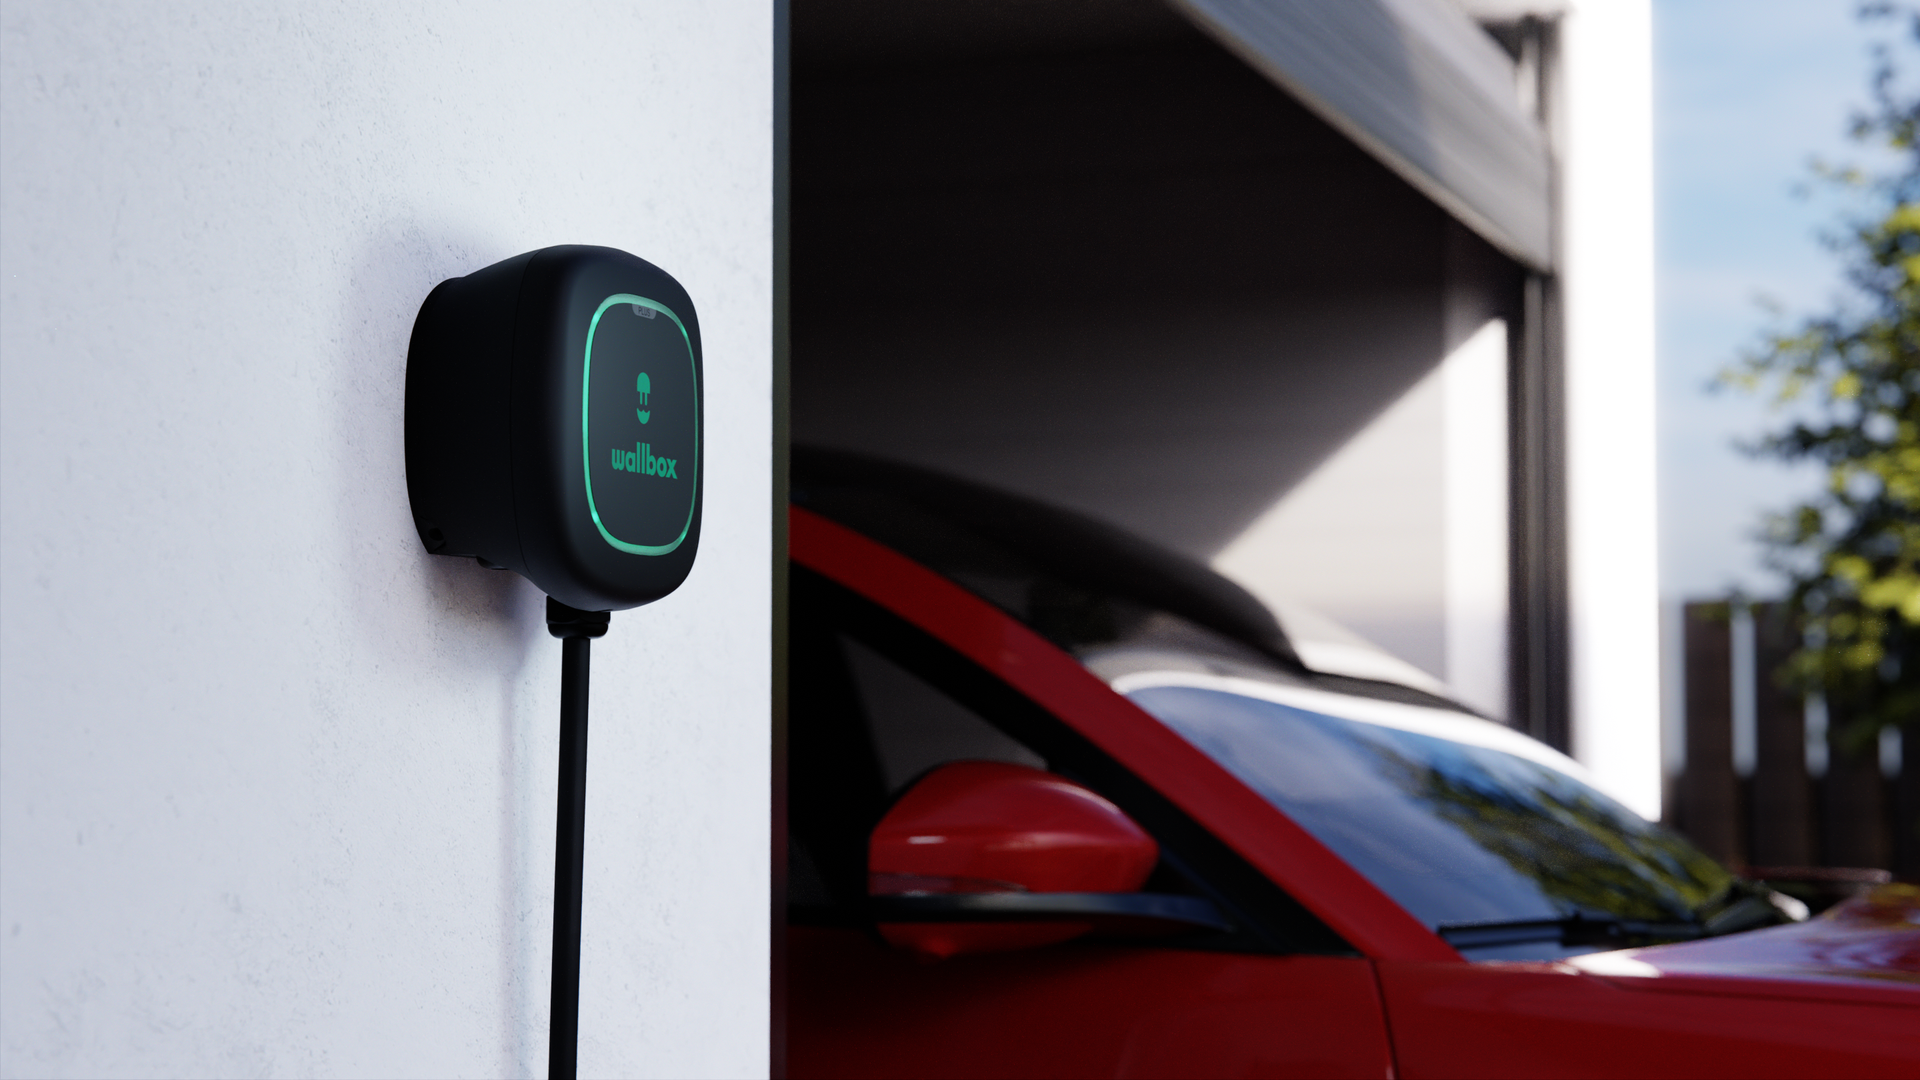 Wallbox home electric vehicle charger.